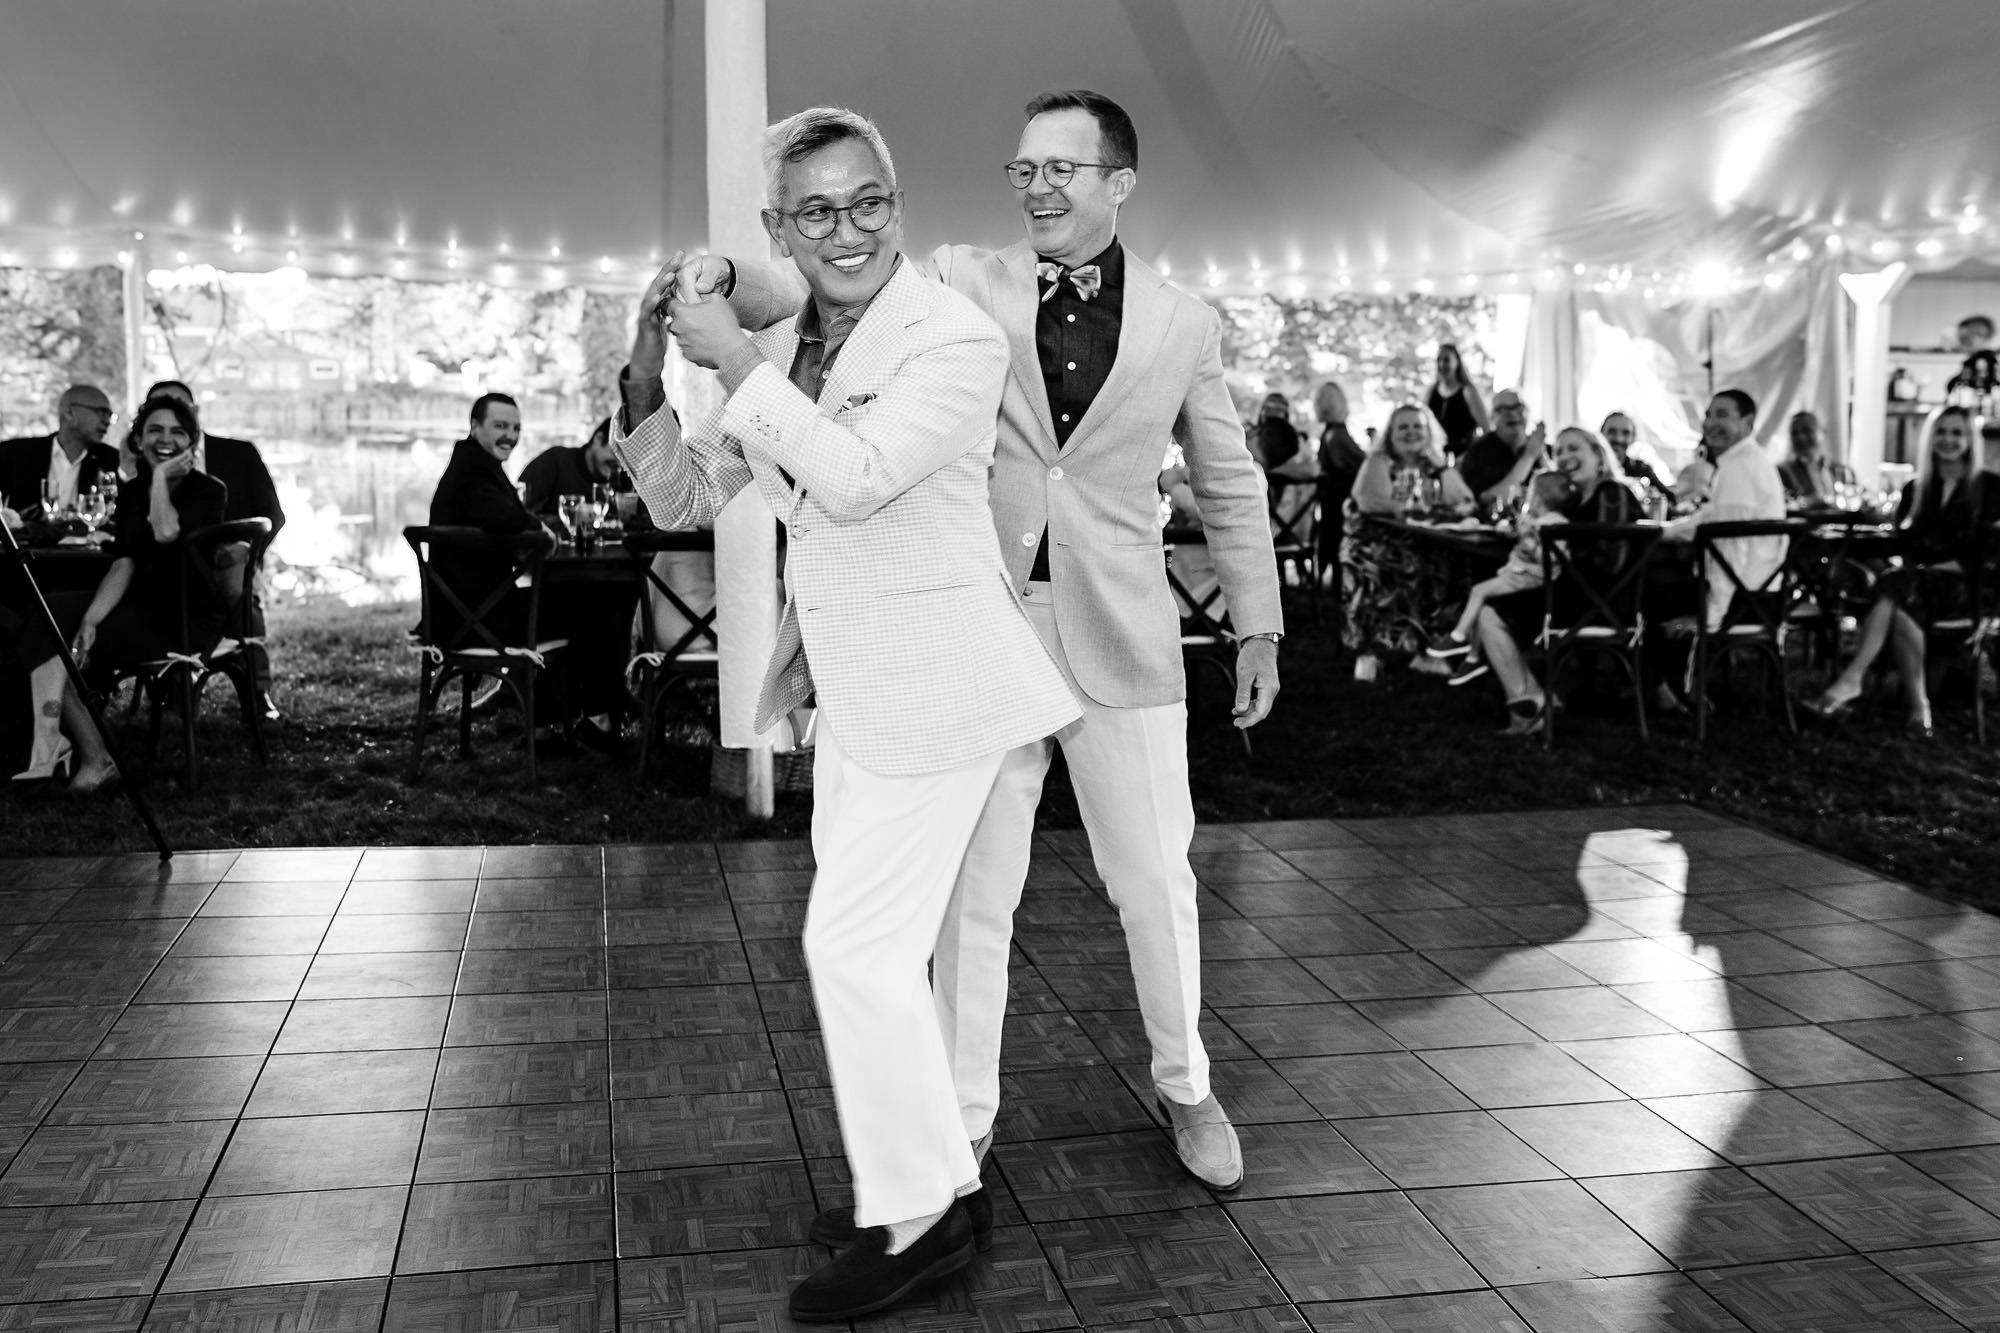 The wedding couple share a first dance at their Rangeley Maine wedding